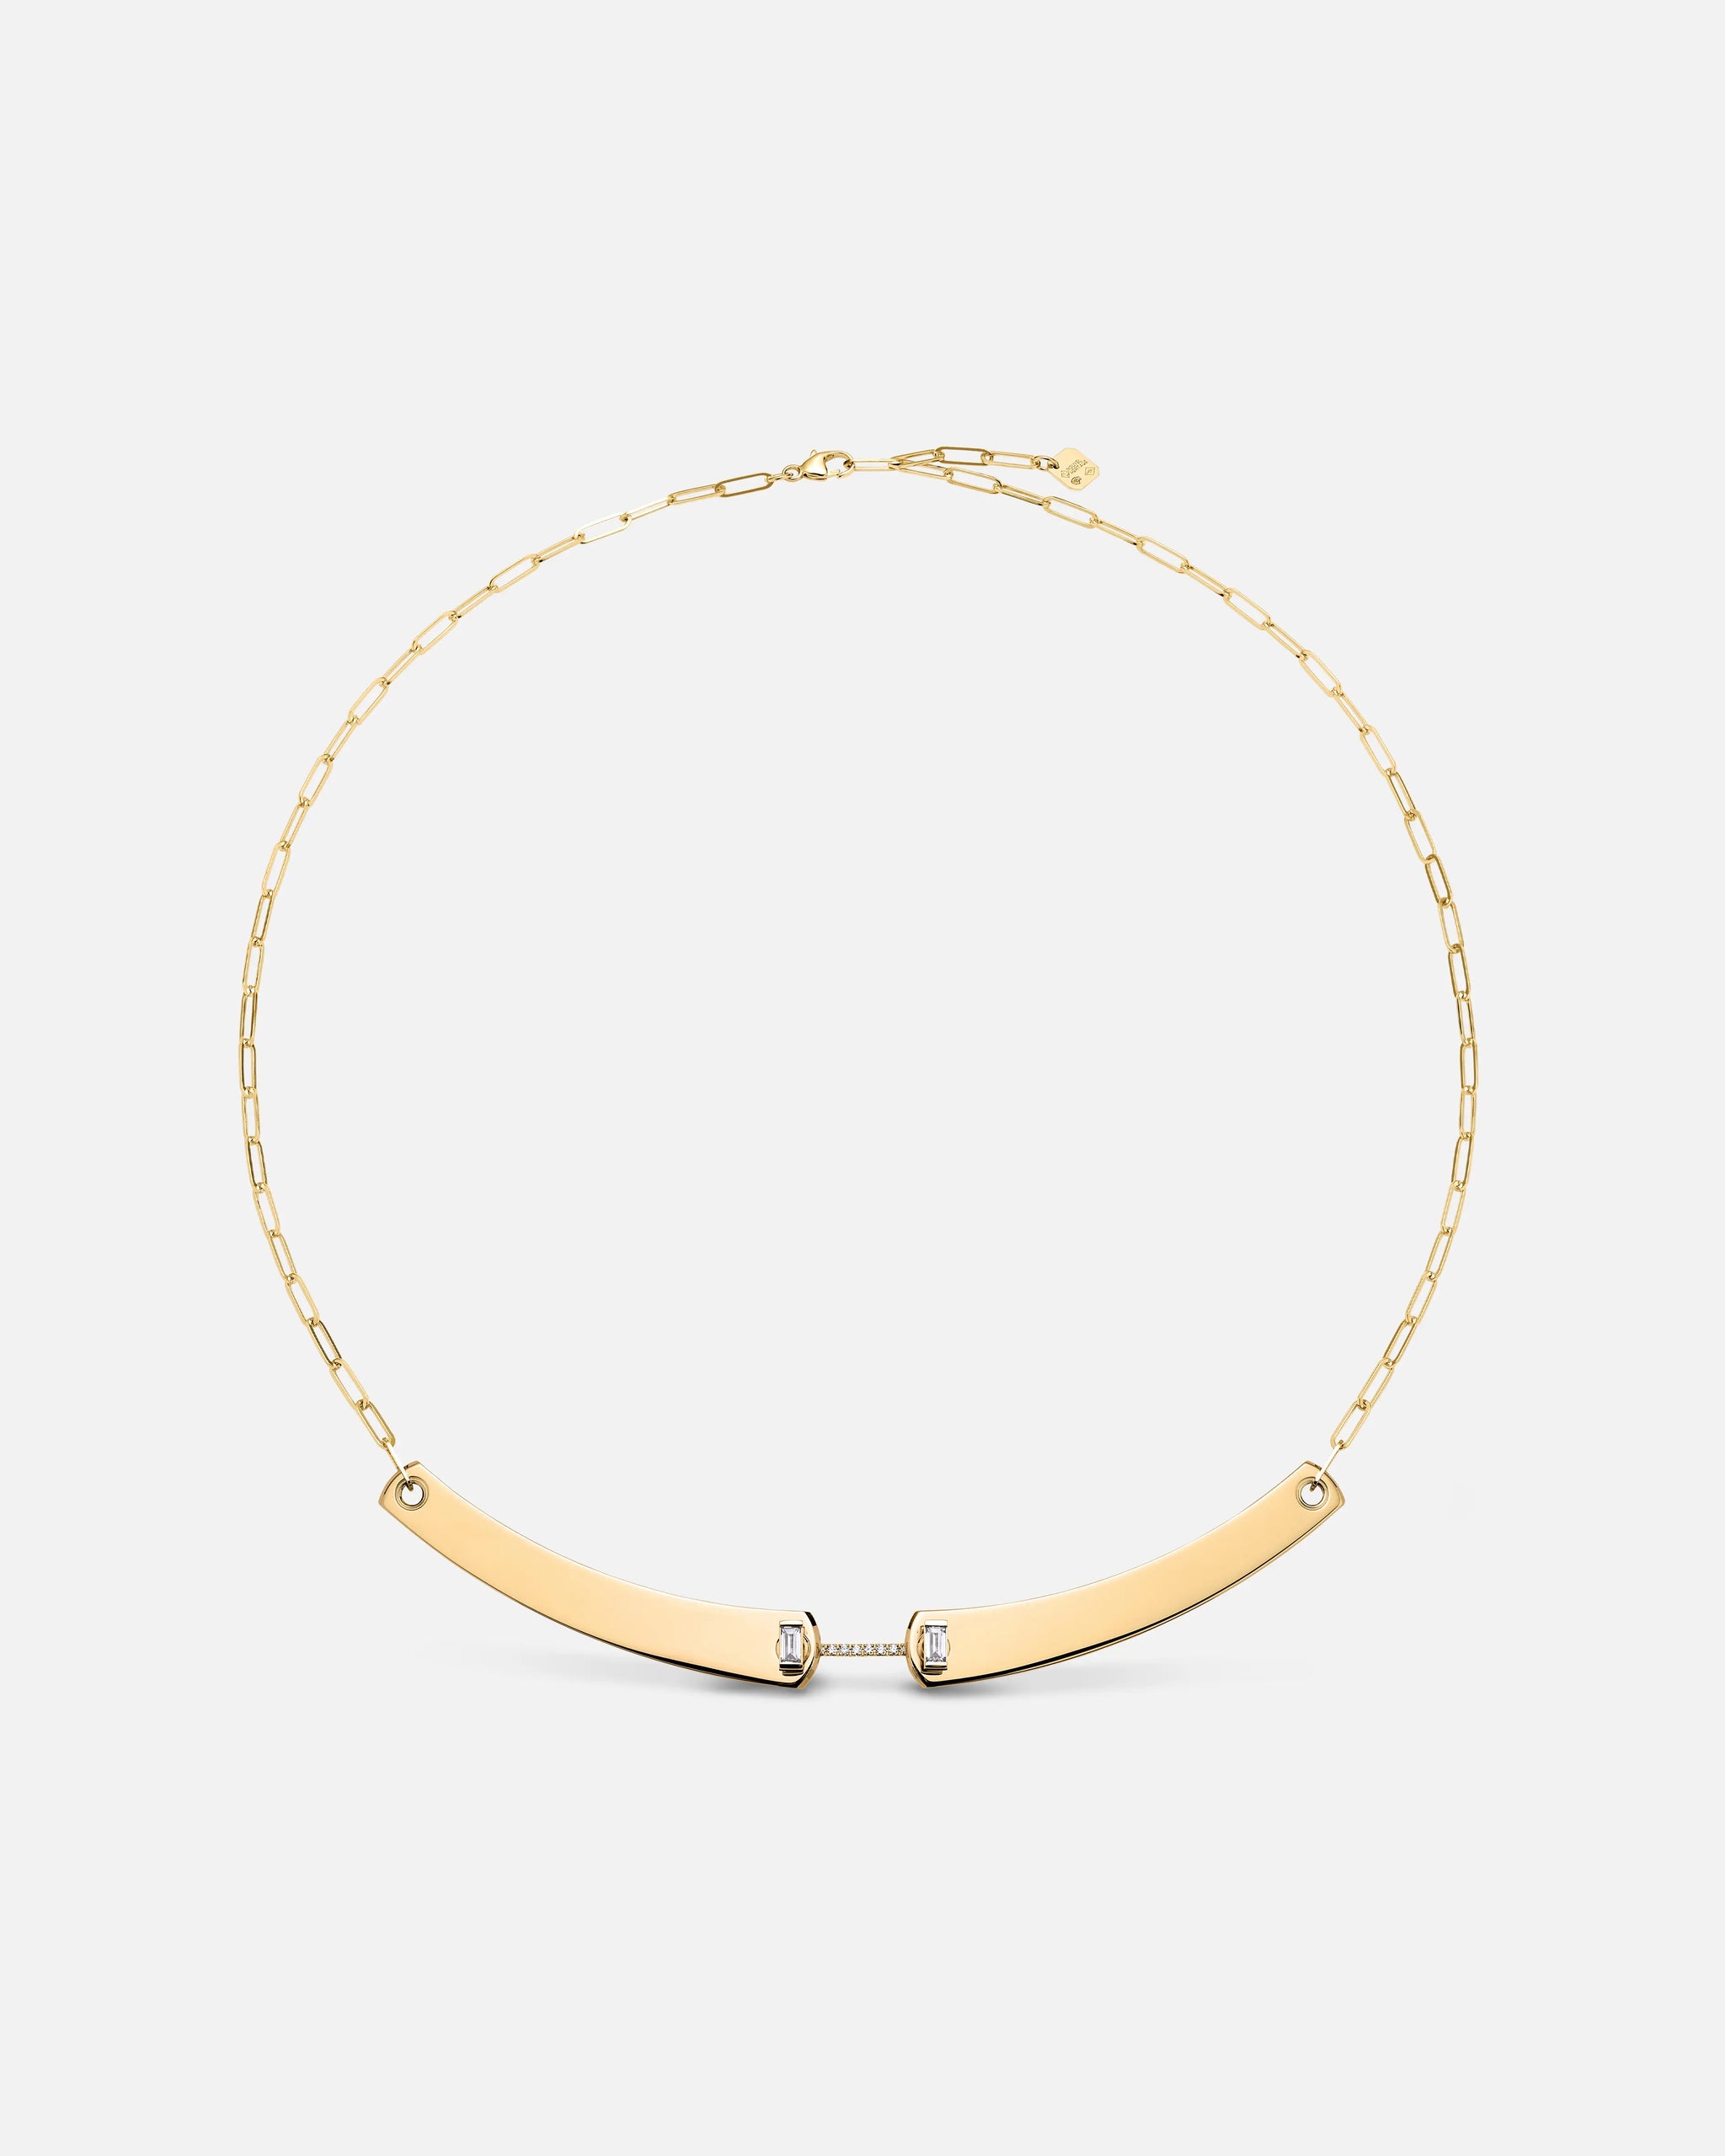 Dinner Date Mood Necklace in Yellow Gold - 1 - Nouvel Heritage